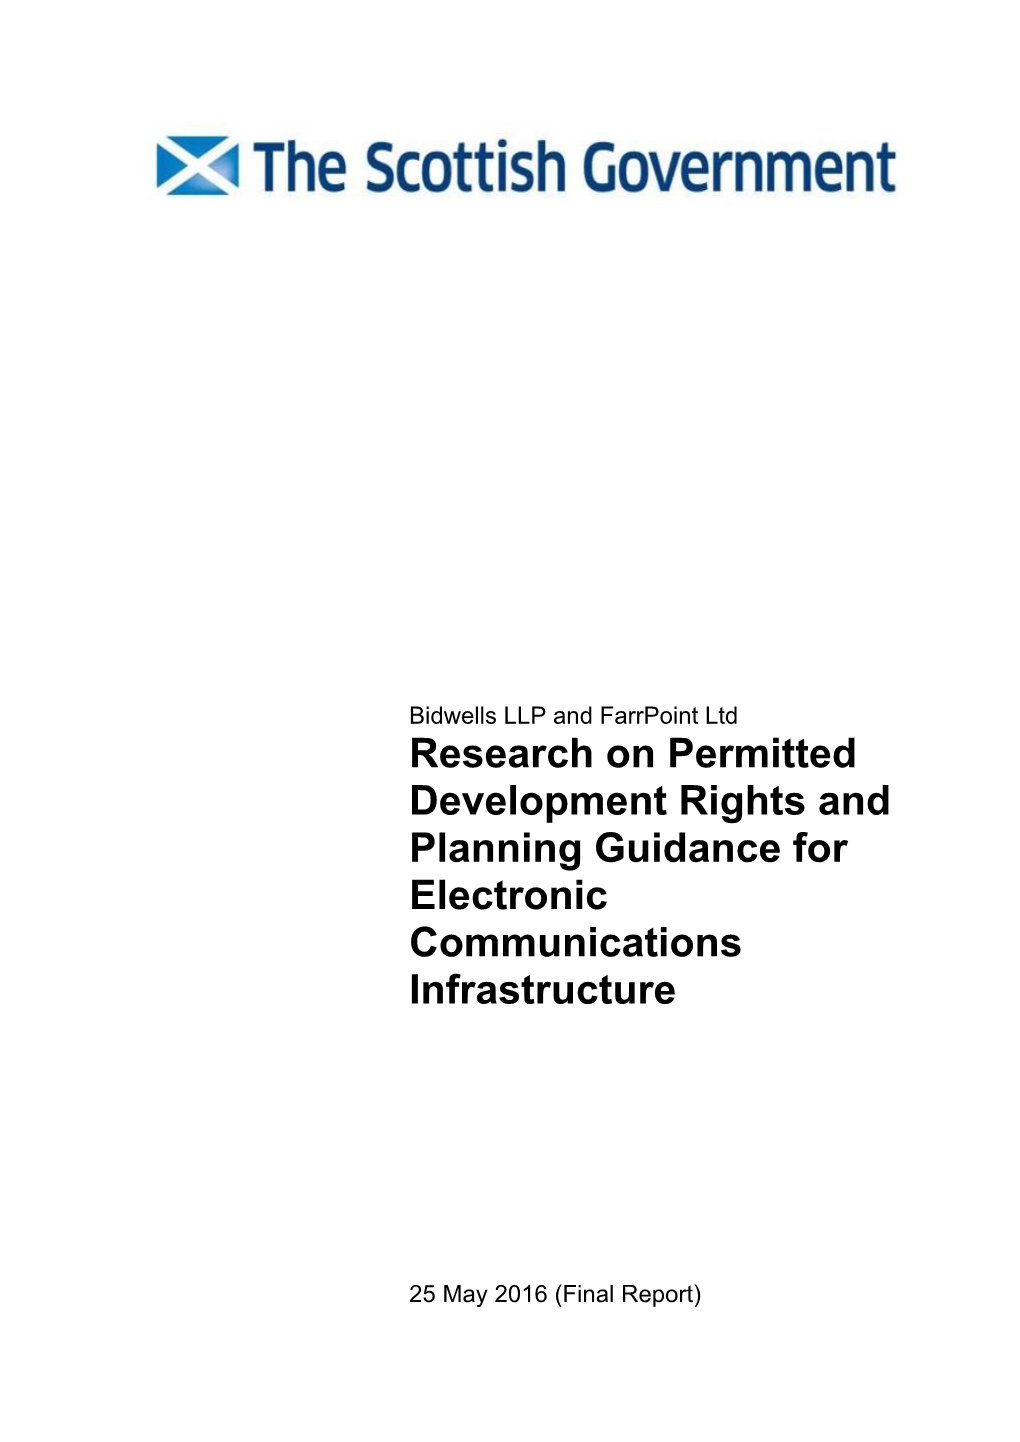 Research on Permitted Development Rights and Planning Guidance for Electronic Communications Infrastructure